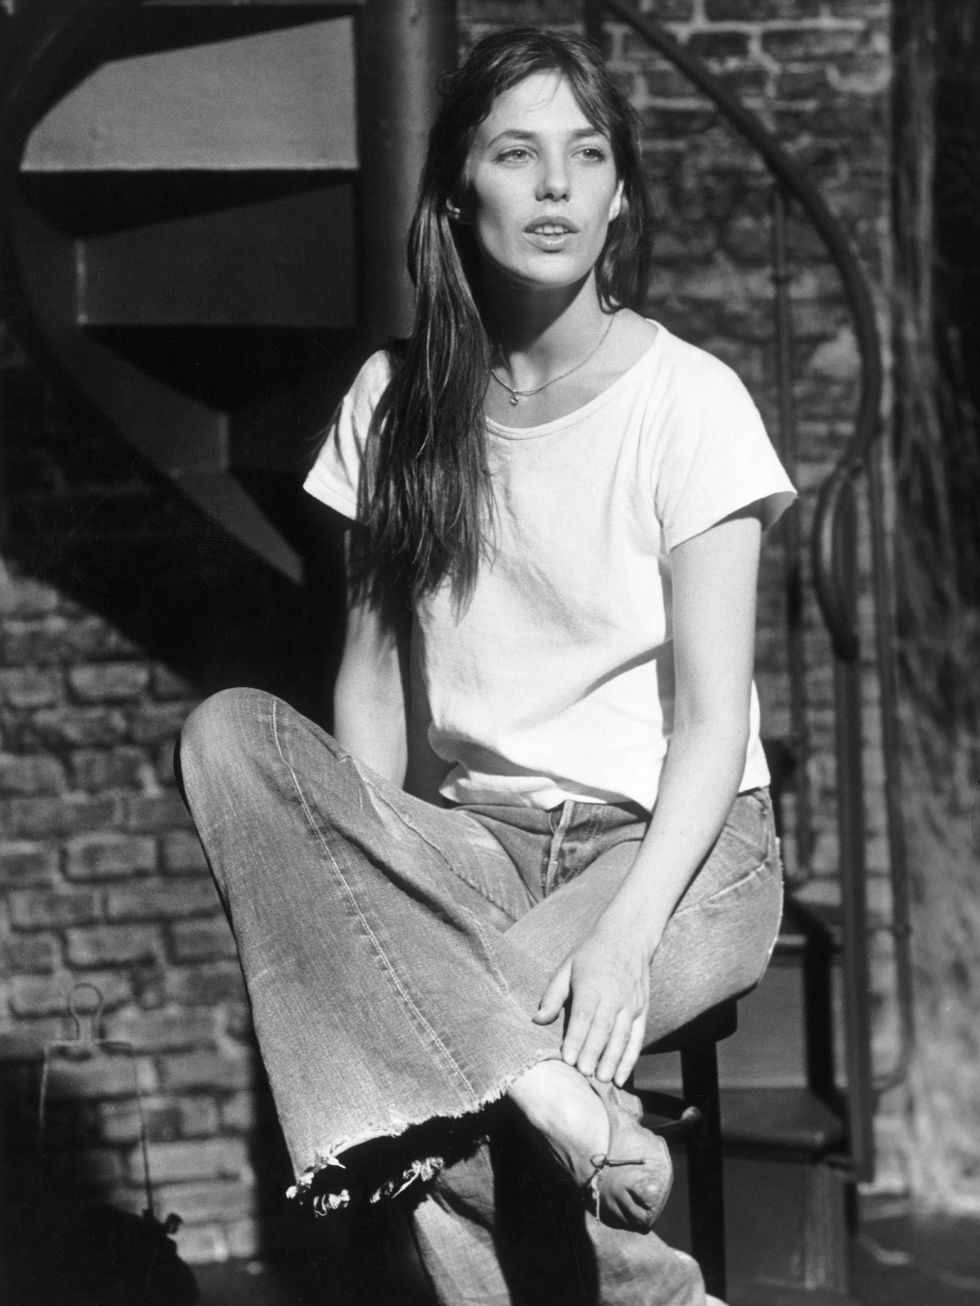 <p><strong>Jane Birkin </strong></p>

<p>"She launched a thousand trends - who doesn't want to look like Jane Birkin?"</p>

<p>Anne Marie Curtis - Fashion Director</p>